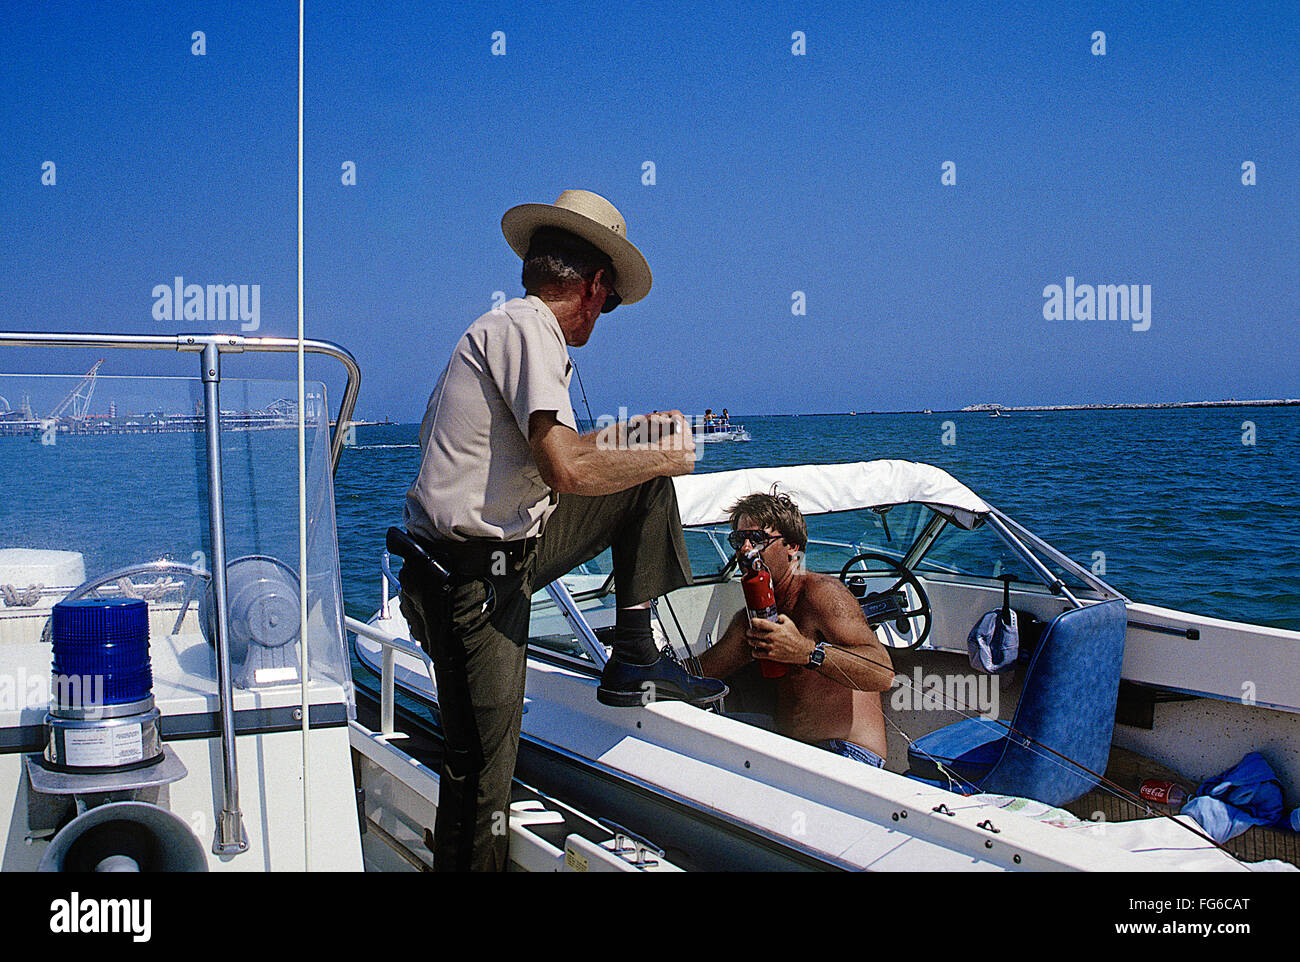 Ocean City, Maryland, USA, 23rd July 1987 Officer Norman Mills of the Maryland Natural Resources marine unit conducts safe boating inspections while patrolling the waters of the Isle of Wight Bay on the west side of Ocean City Md.  Credit: Mark Reinstein Stock Photo